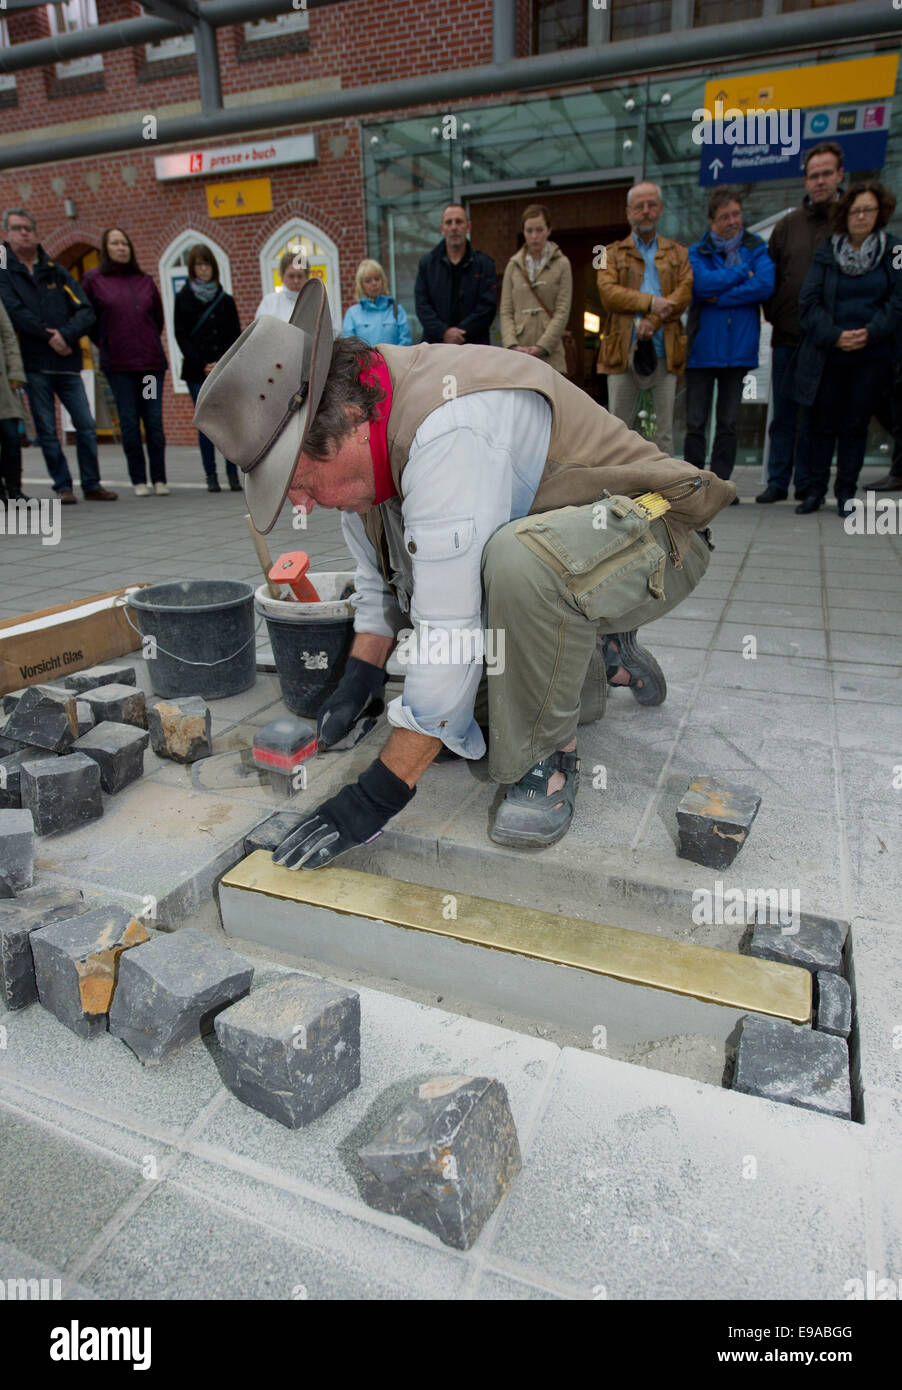 Stralsund, Germany. 23rd Oct, 2014. The artist Gunter Demnig places a tripping treshold at the main station in Stralsund, Germany, 23 October 2014. More than 1000 mentally ill people from the former regional mental institution were deported in 1939 via the main station. Altogether around 70 000 mentally ill people were victimised of the systematical holocaust campaign 'Aktion T4' during the National Socialism. Photo: Stefan Sauer/dpa/Alamy Live News Stock Photo